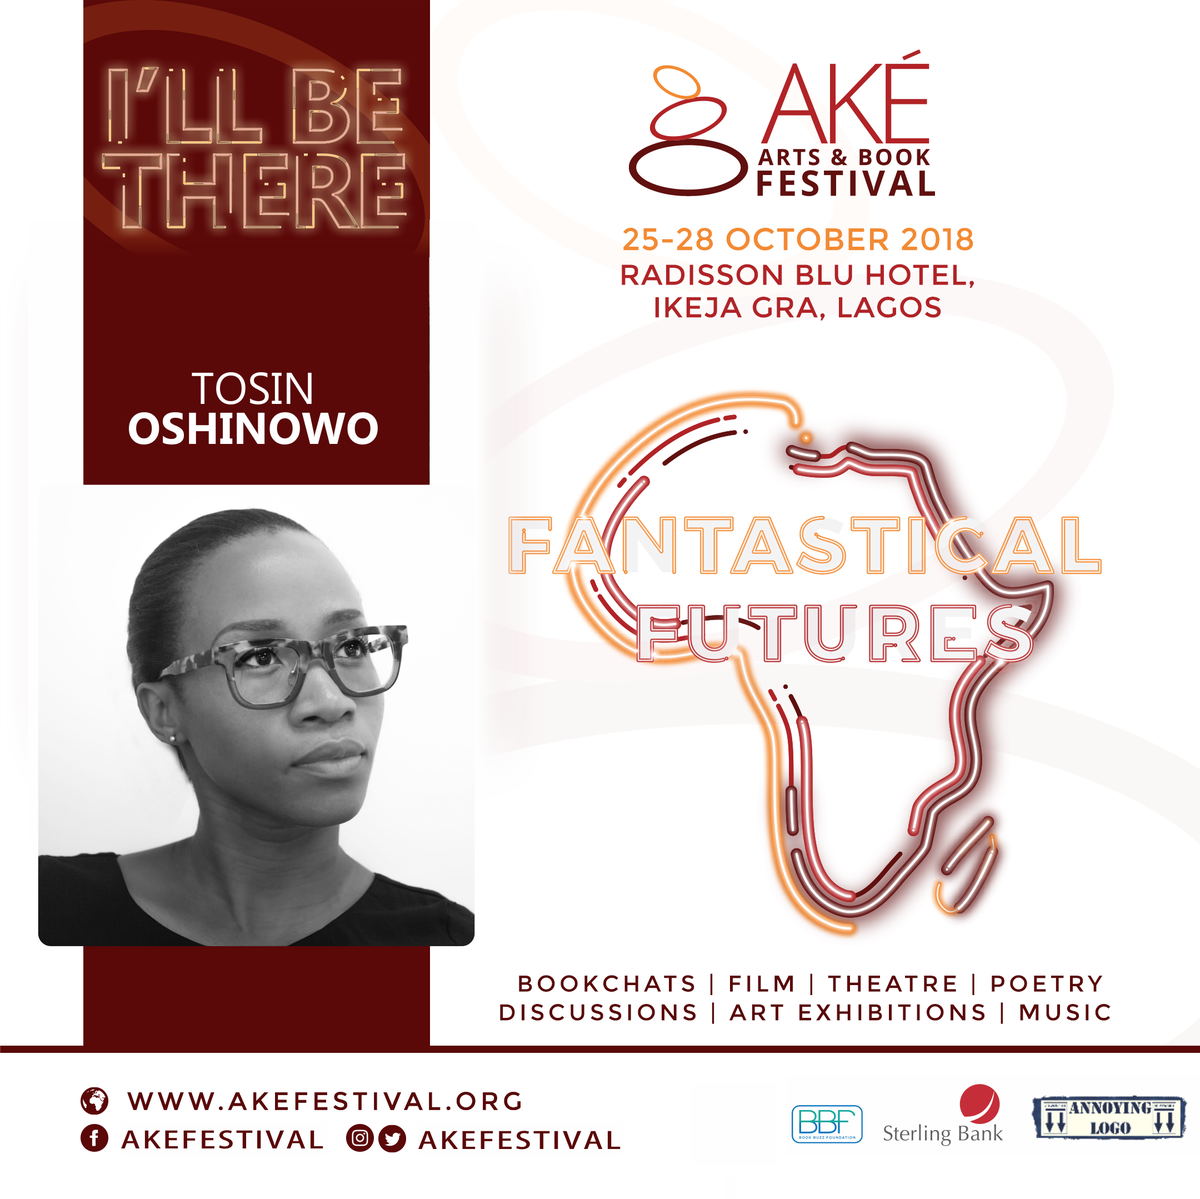 Tosin Oshinowo @oshinowo_tosin is a registered architect in the Federal Republic of Nigeria and also a member of the Royal Institute of the British Architects. Her written work includes an article on the reclamation of public space in Lagos, which was published in October 2012.